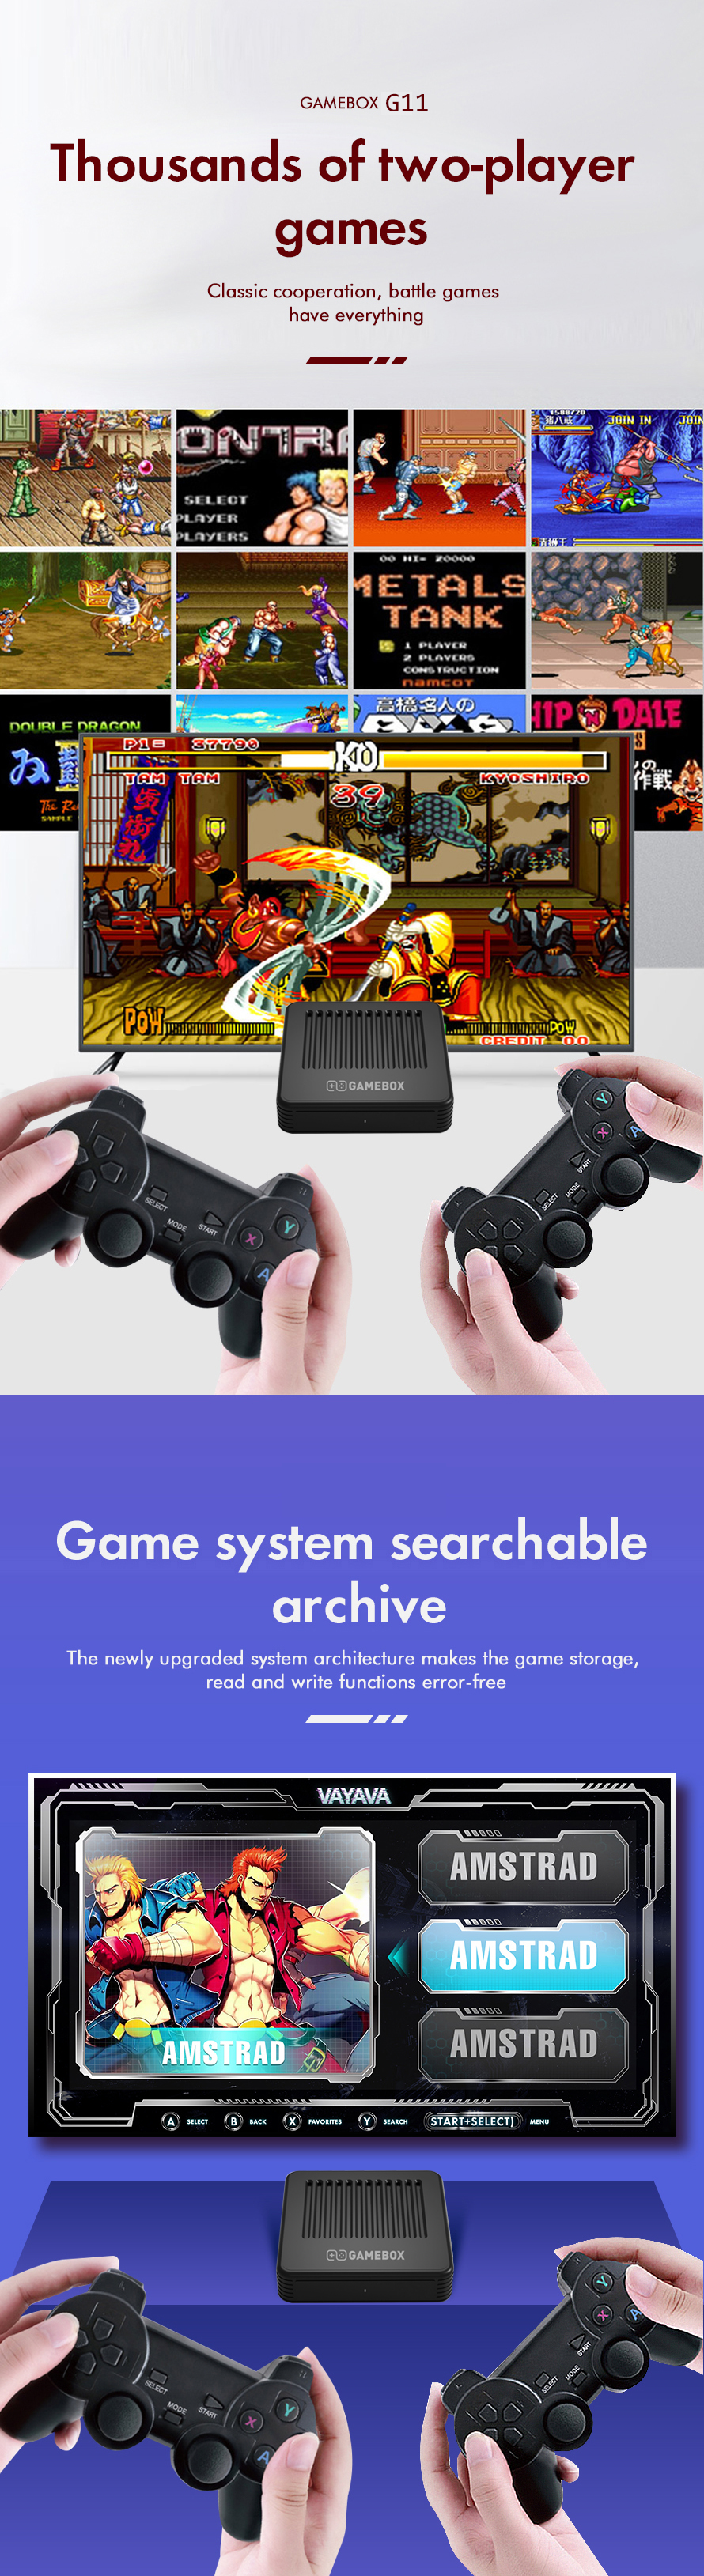 G11-256GB-30000-Games-TV-Game-Conosle-for-PSP-DC-PS1-MAME-FC-MD-Retro-Emuelec-45-Android-90-Dual-Sys-1962136-5